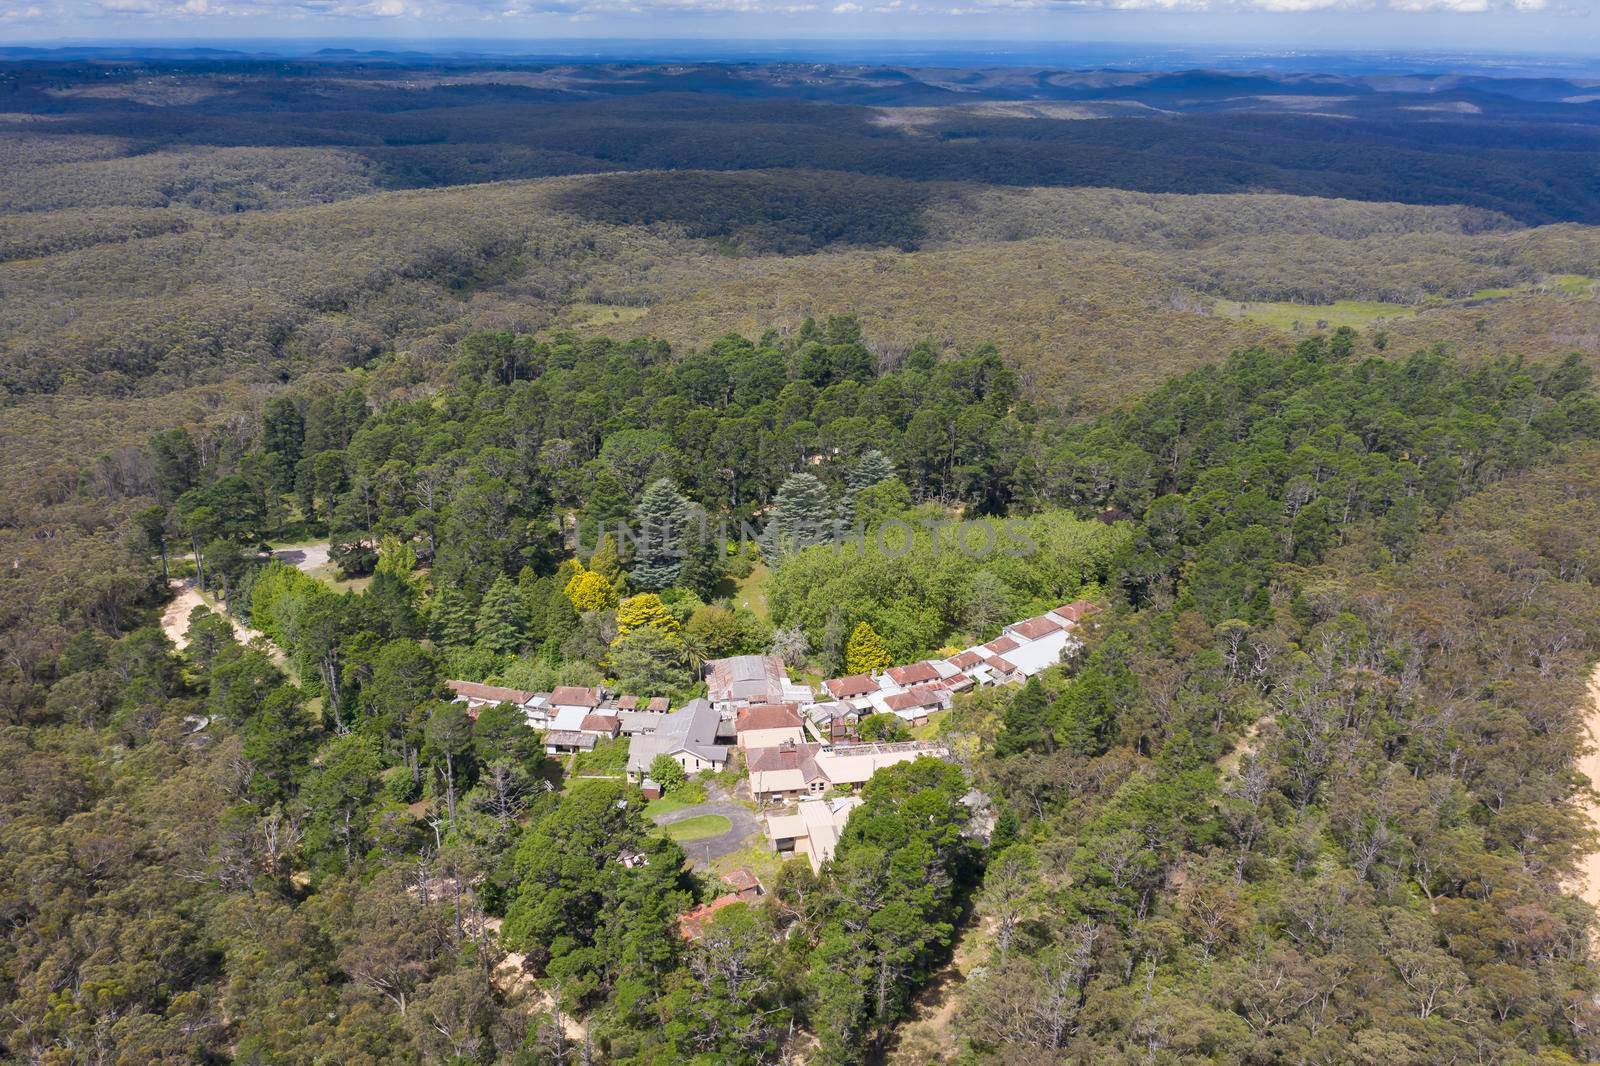 Aerial view of the old Queen Victoria Sanatorium in The Blue Mountains in regional Australia by WittkePhotos